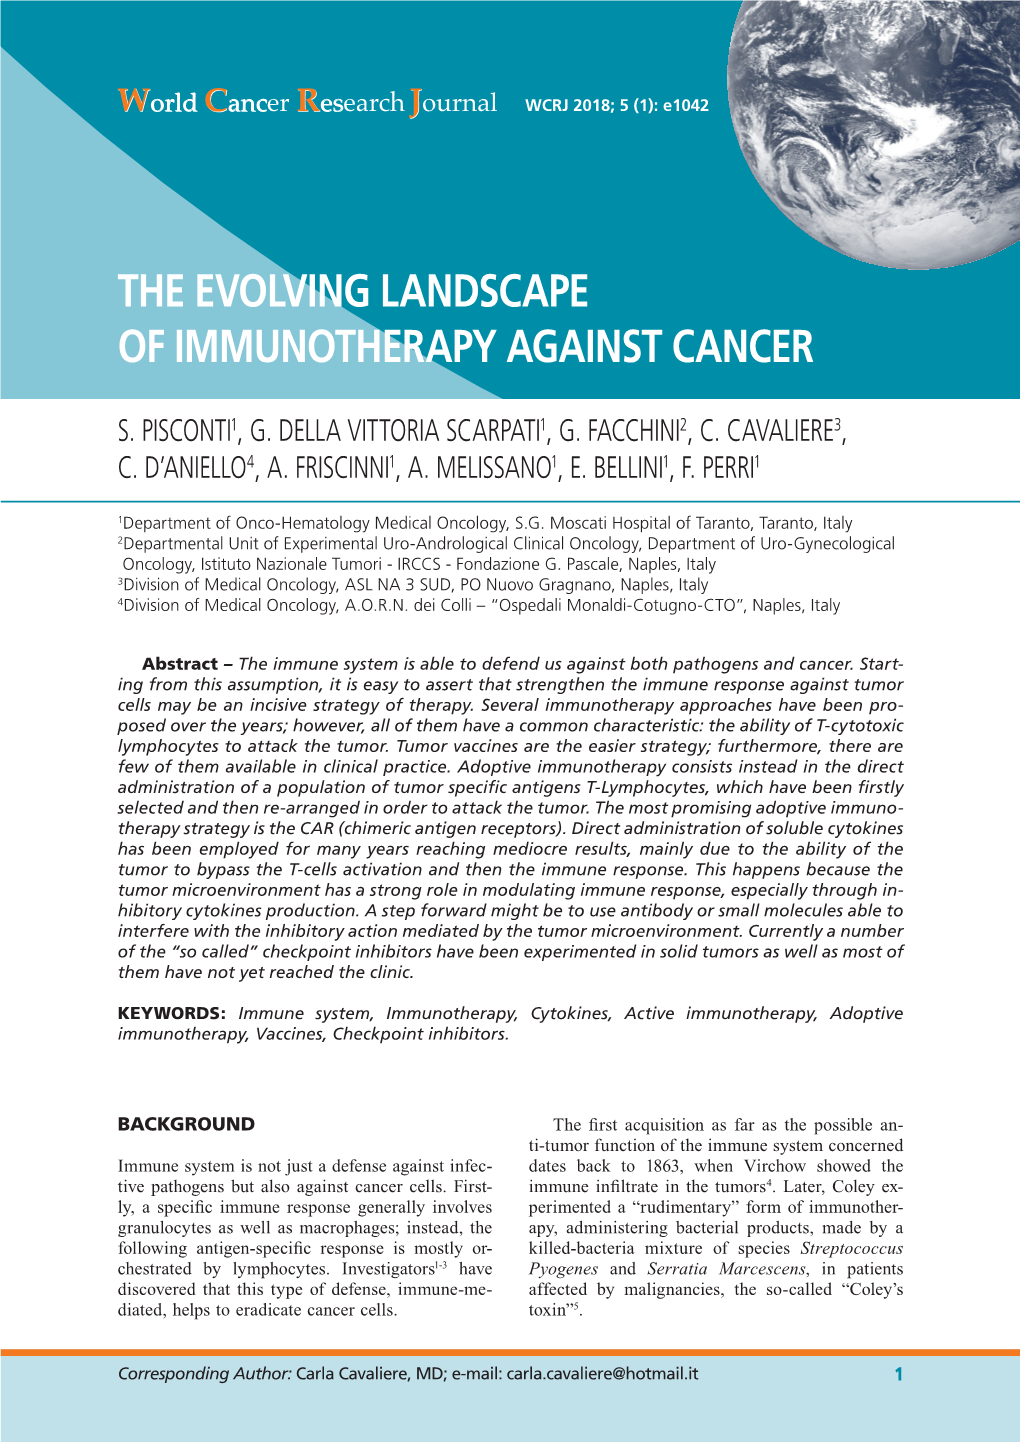 The Evolving Landscape of Immunotherapy Against Cancer